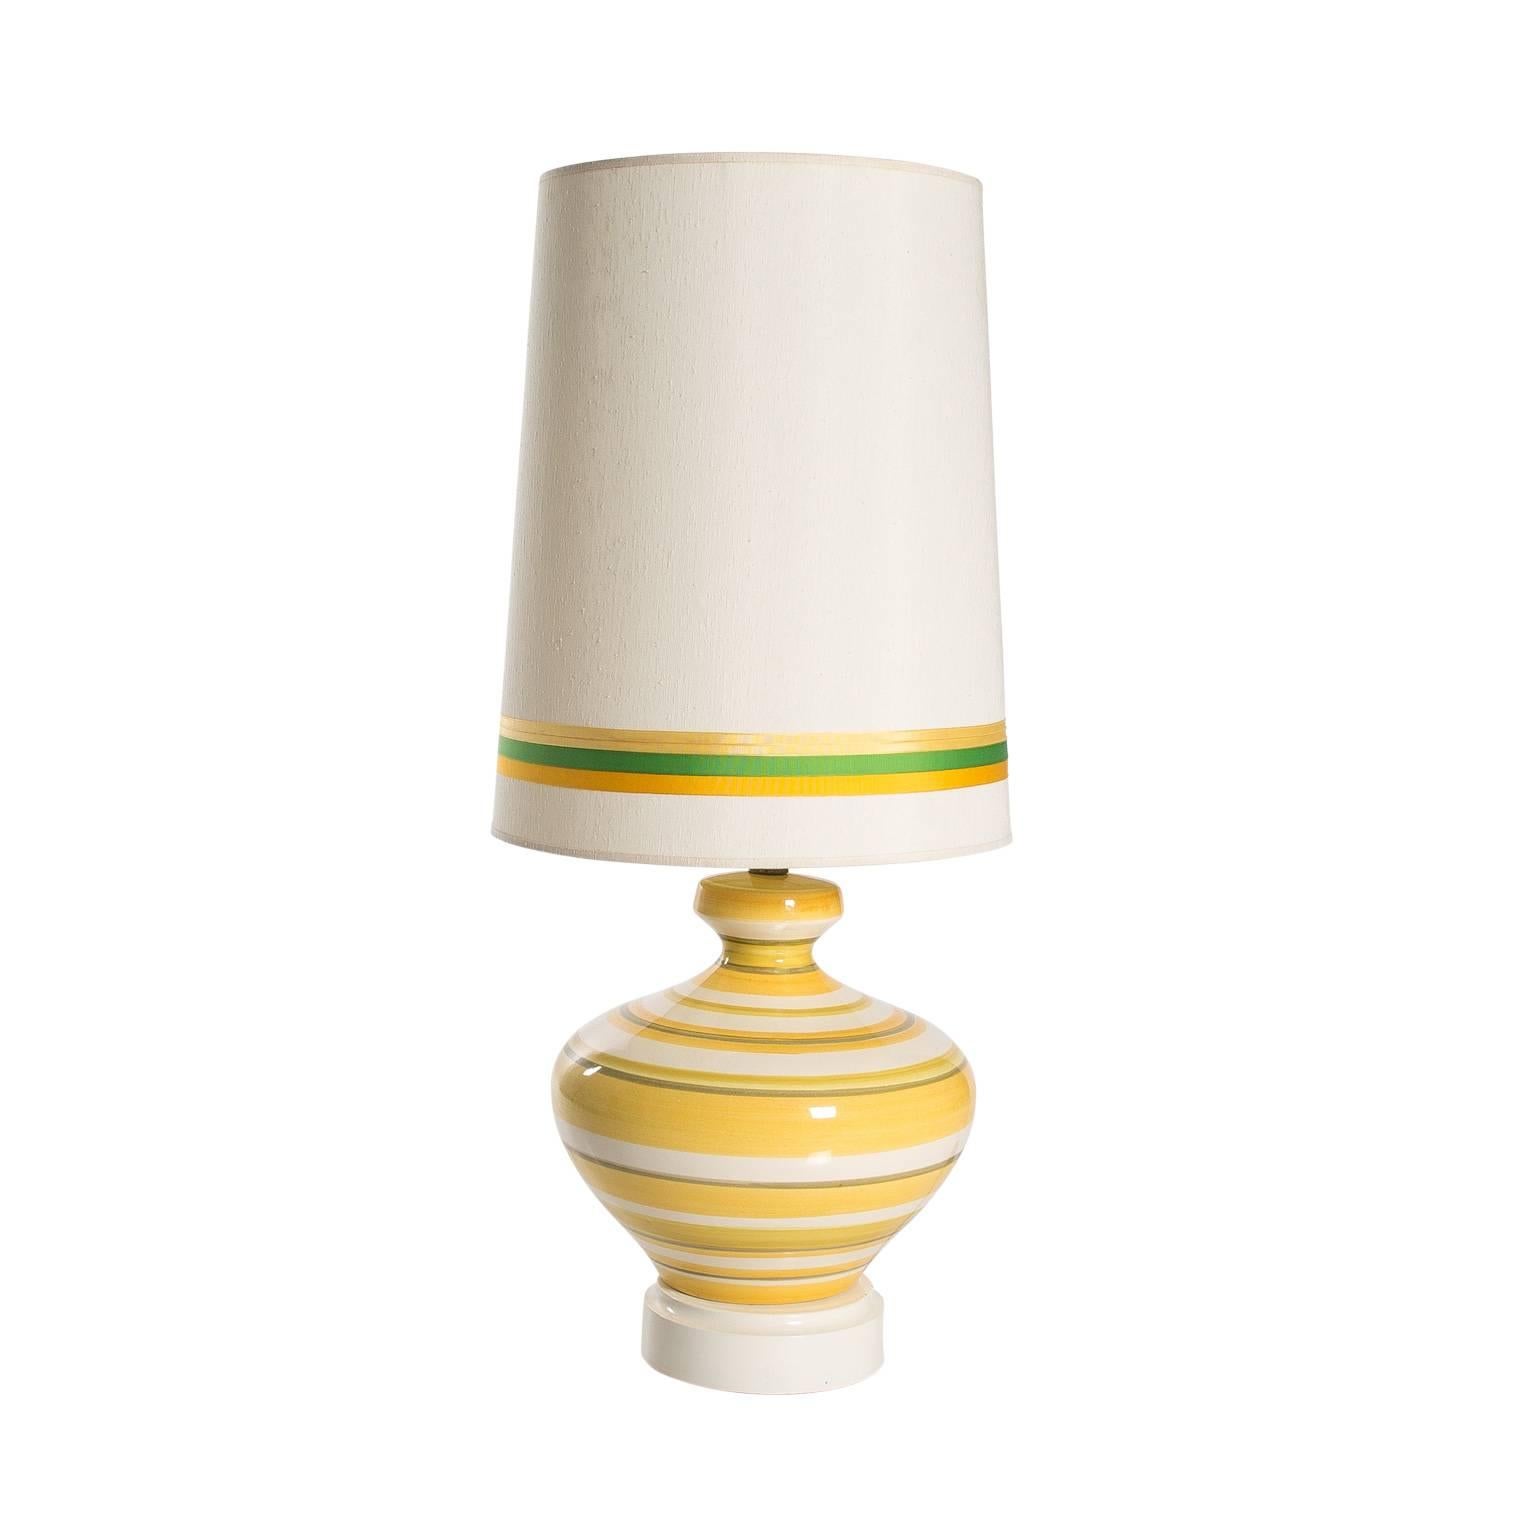 Pair of glazed ceramic yellow, white, and green striped table lamps with matching green and yellow shades.
 